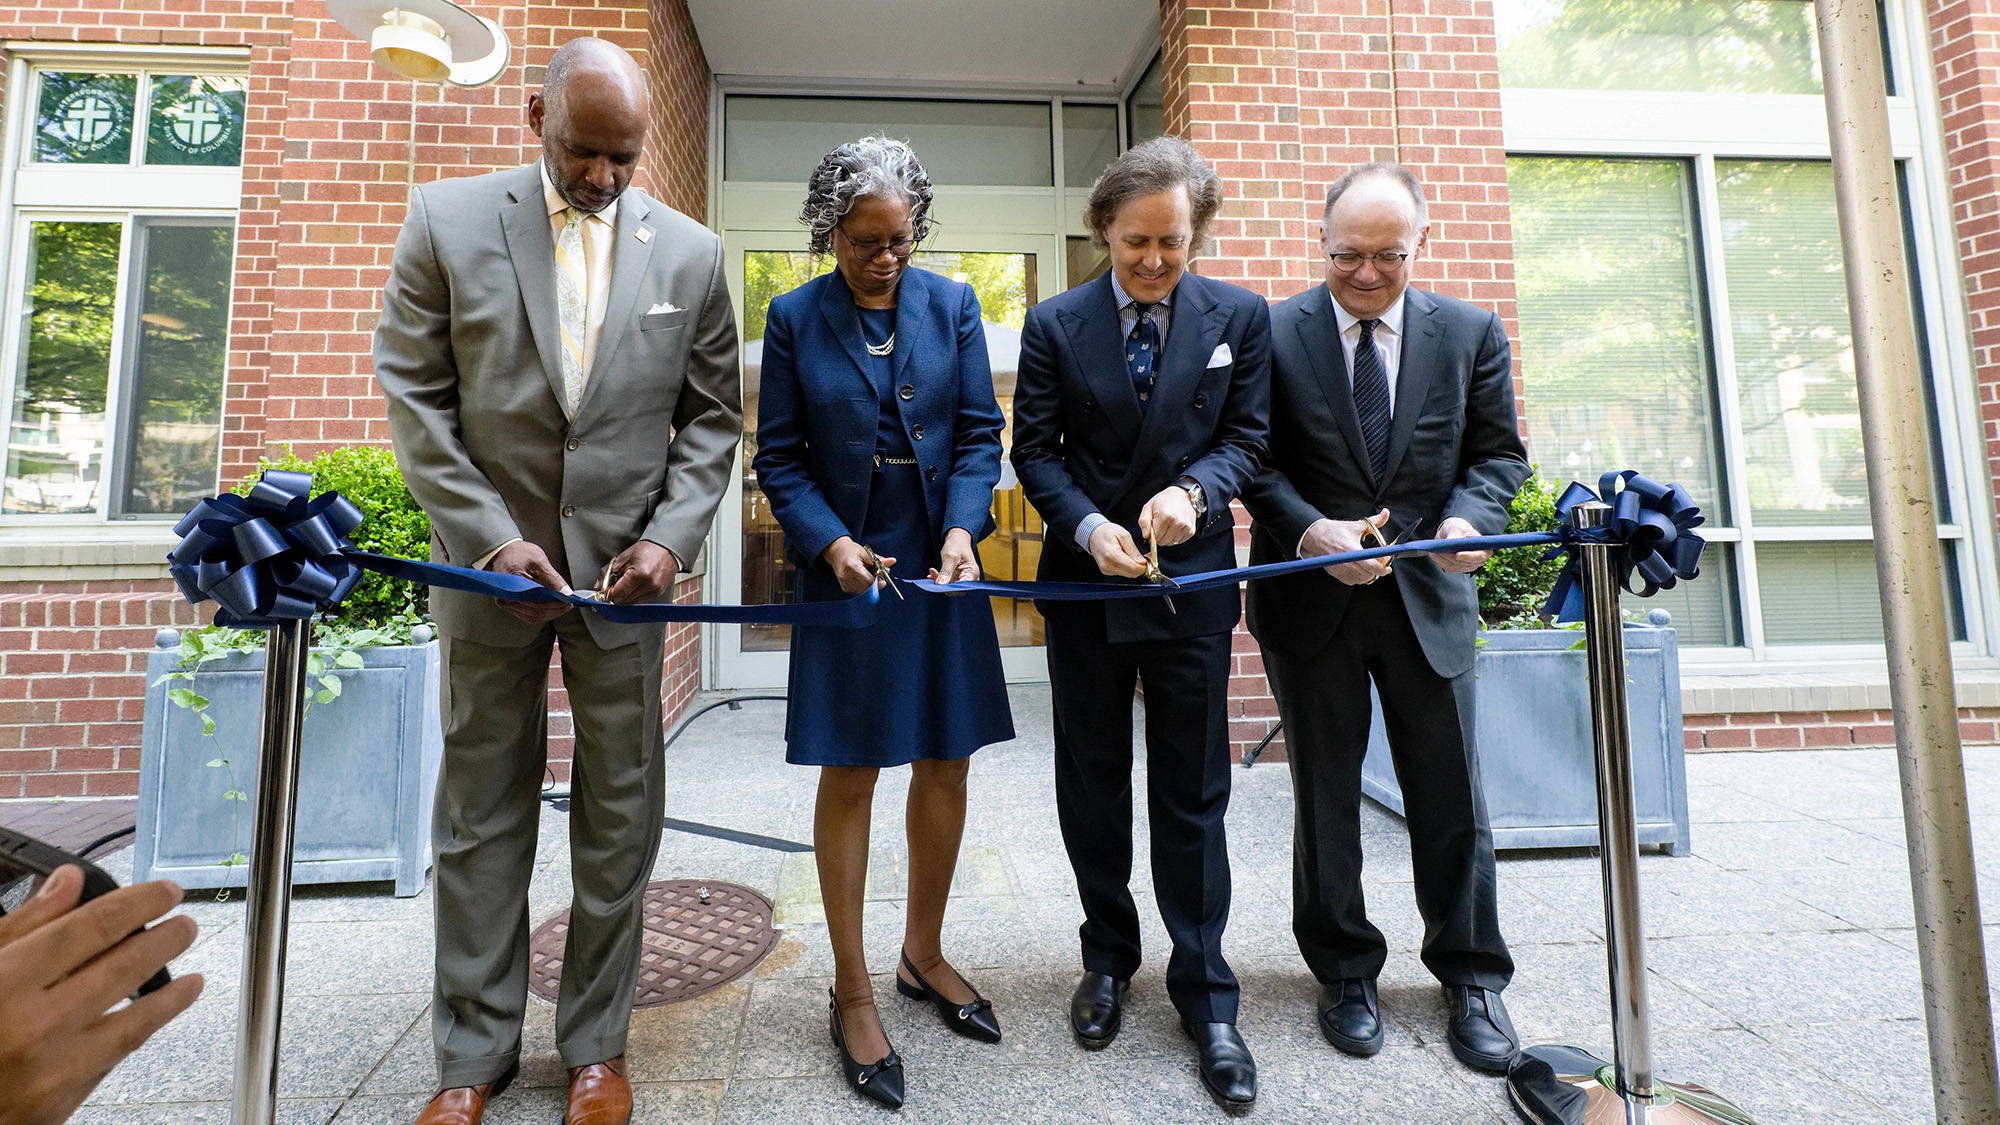 Four individuals cut a ceremonial ribbon for the opening of the Ralph Lauren Center